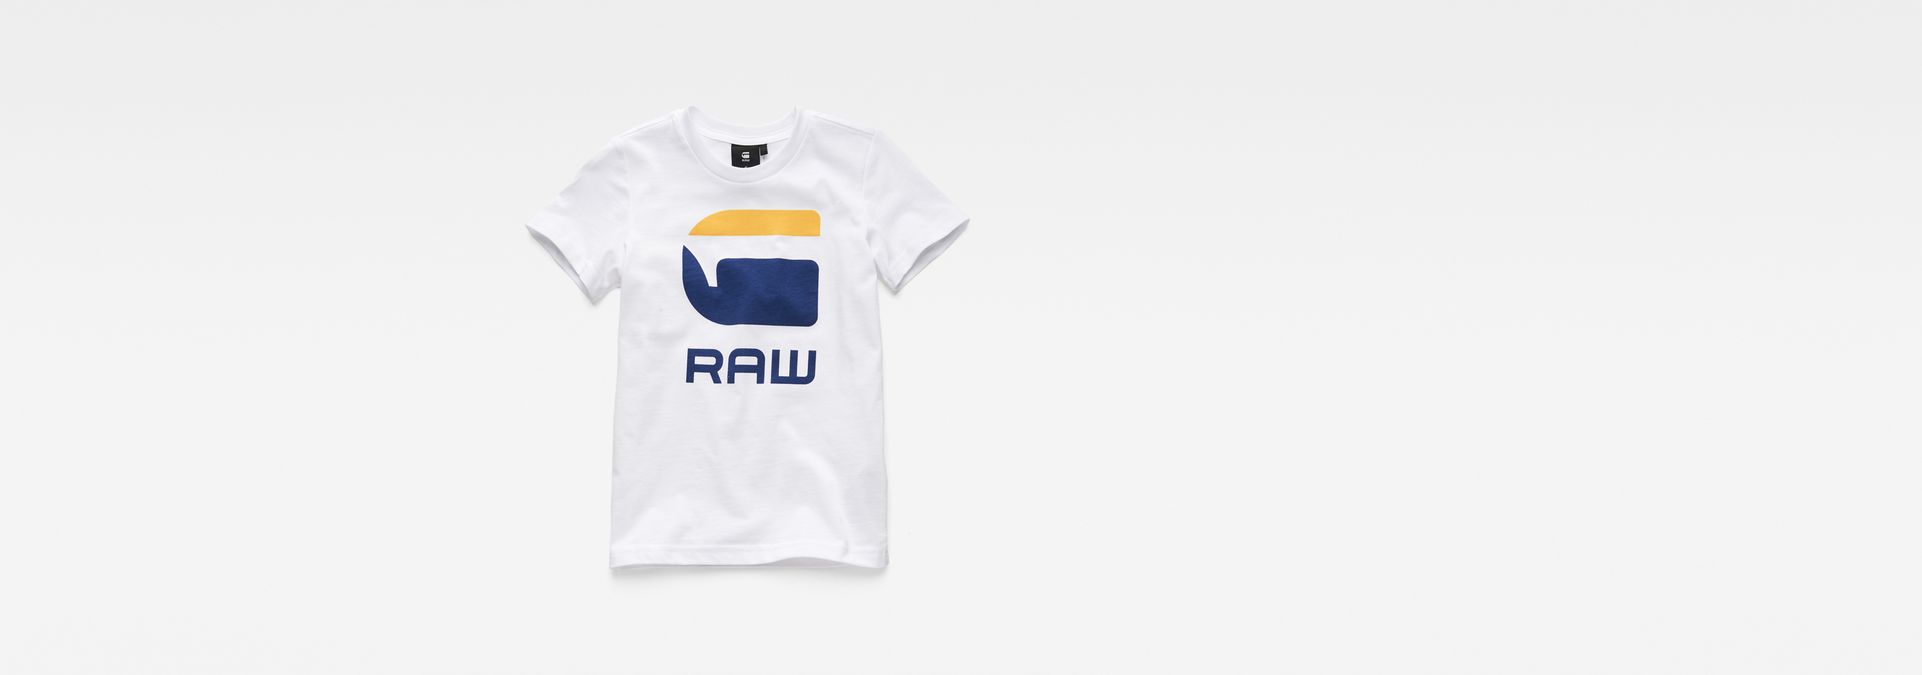 g star raw baby clothes